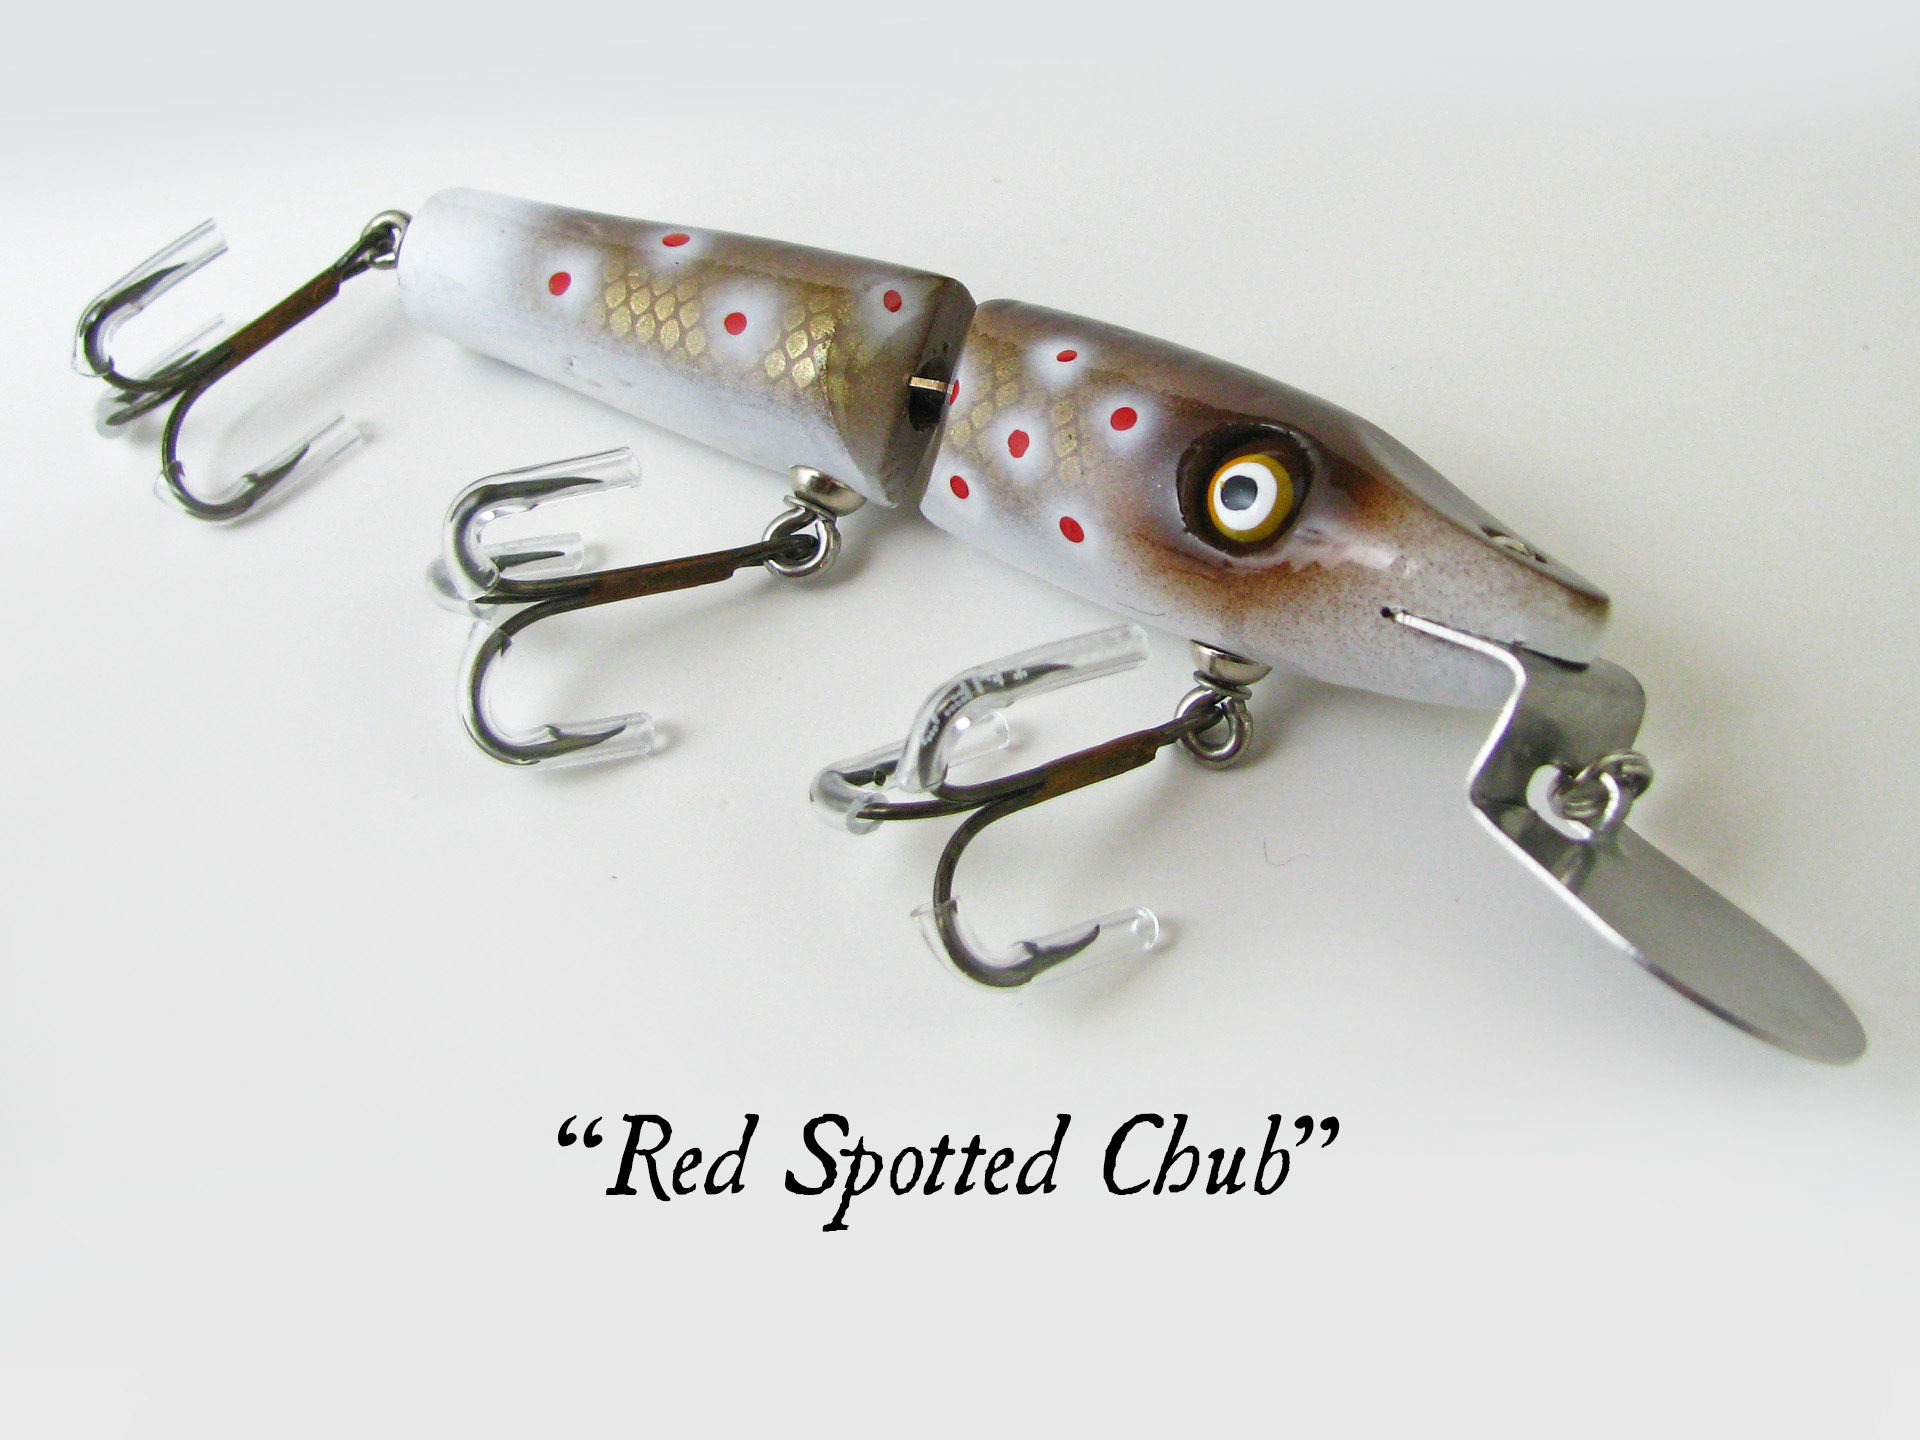 Jointed Piko Plug_Red Spotted Chub.jpg